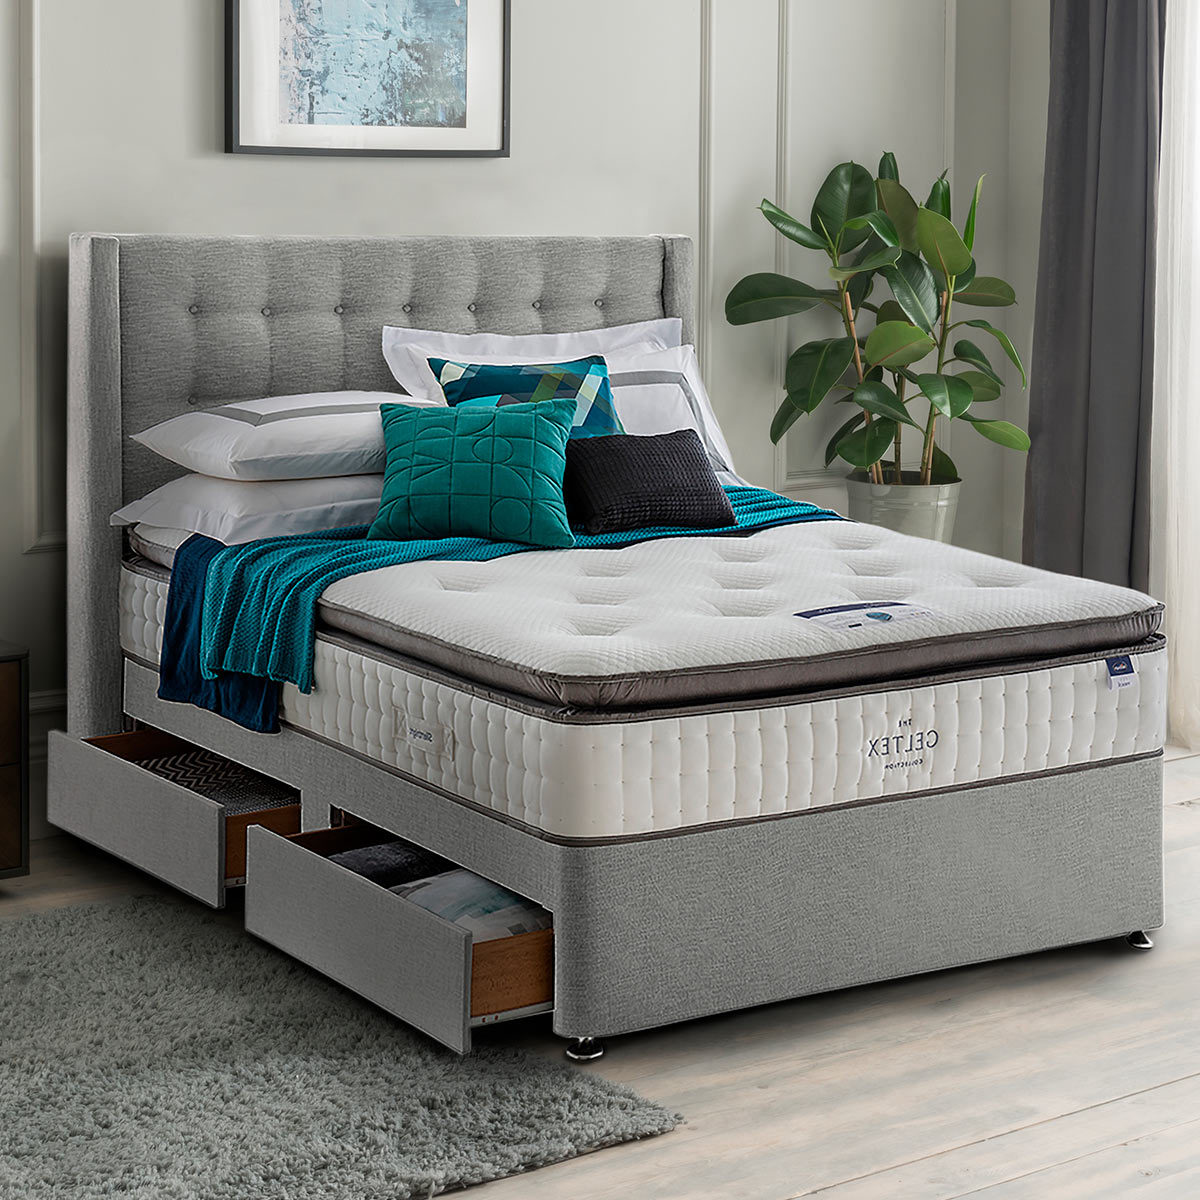 Silentnight 4 Drawer Divan Base With, Costco Bed Frame With Drawers